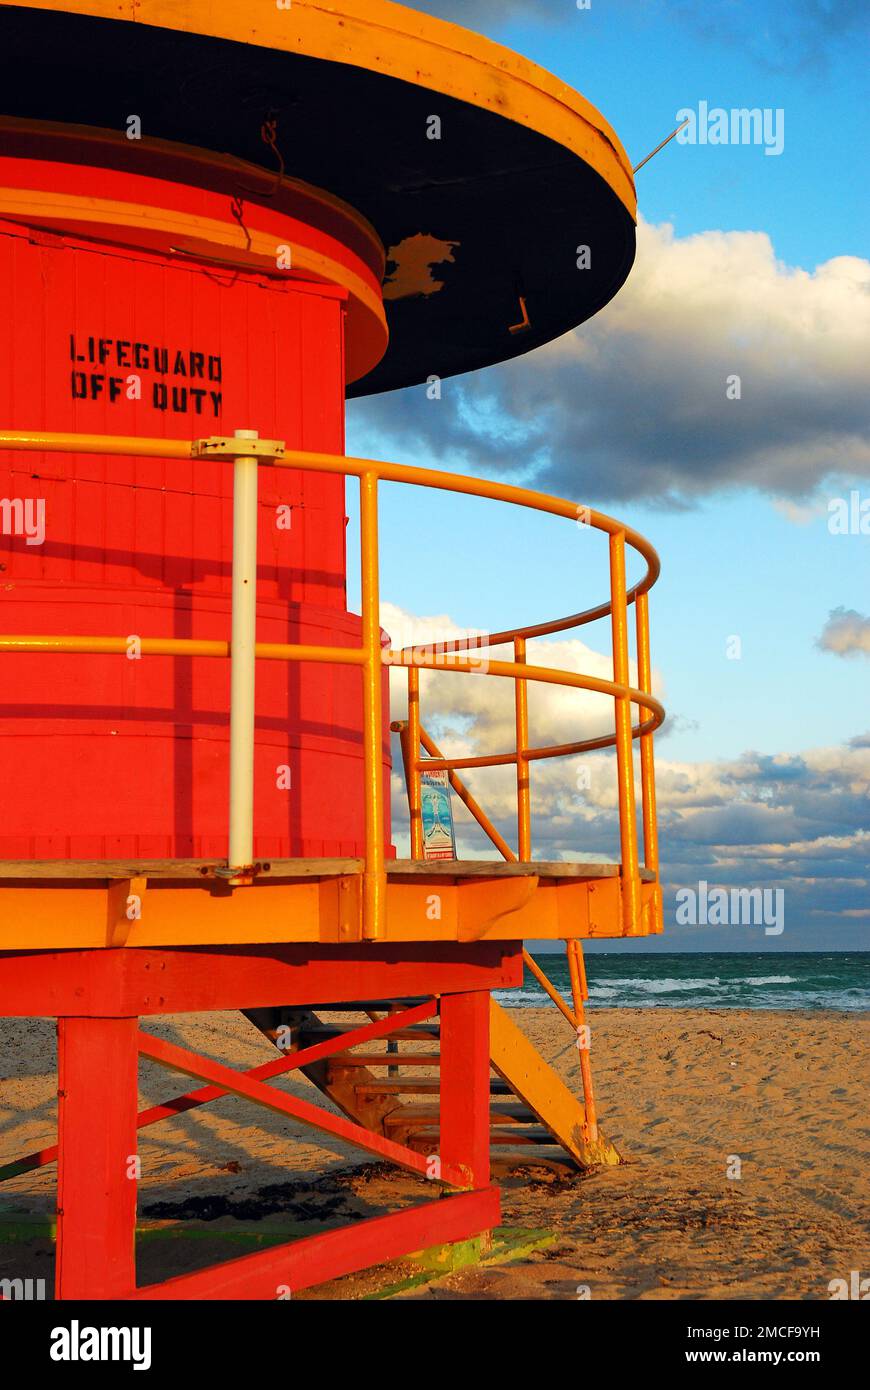 A funky and colorful lifeguard station, temporarily closed, stands along Miami Beach, awaiting the next day of beach goers on summer vacation Stock Photo